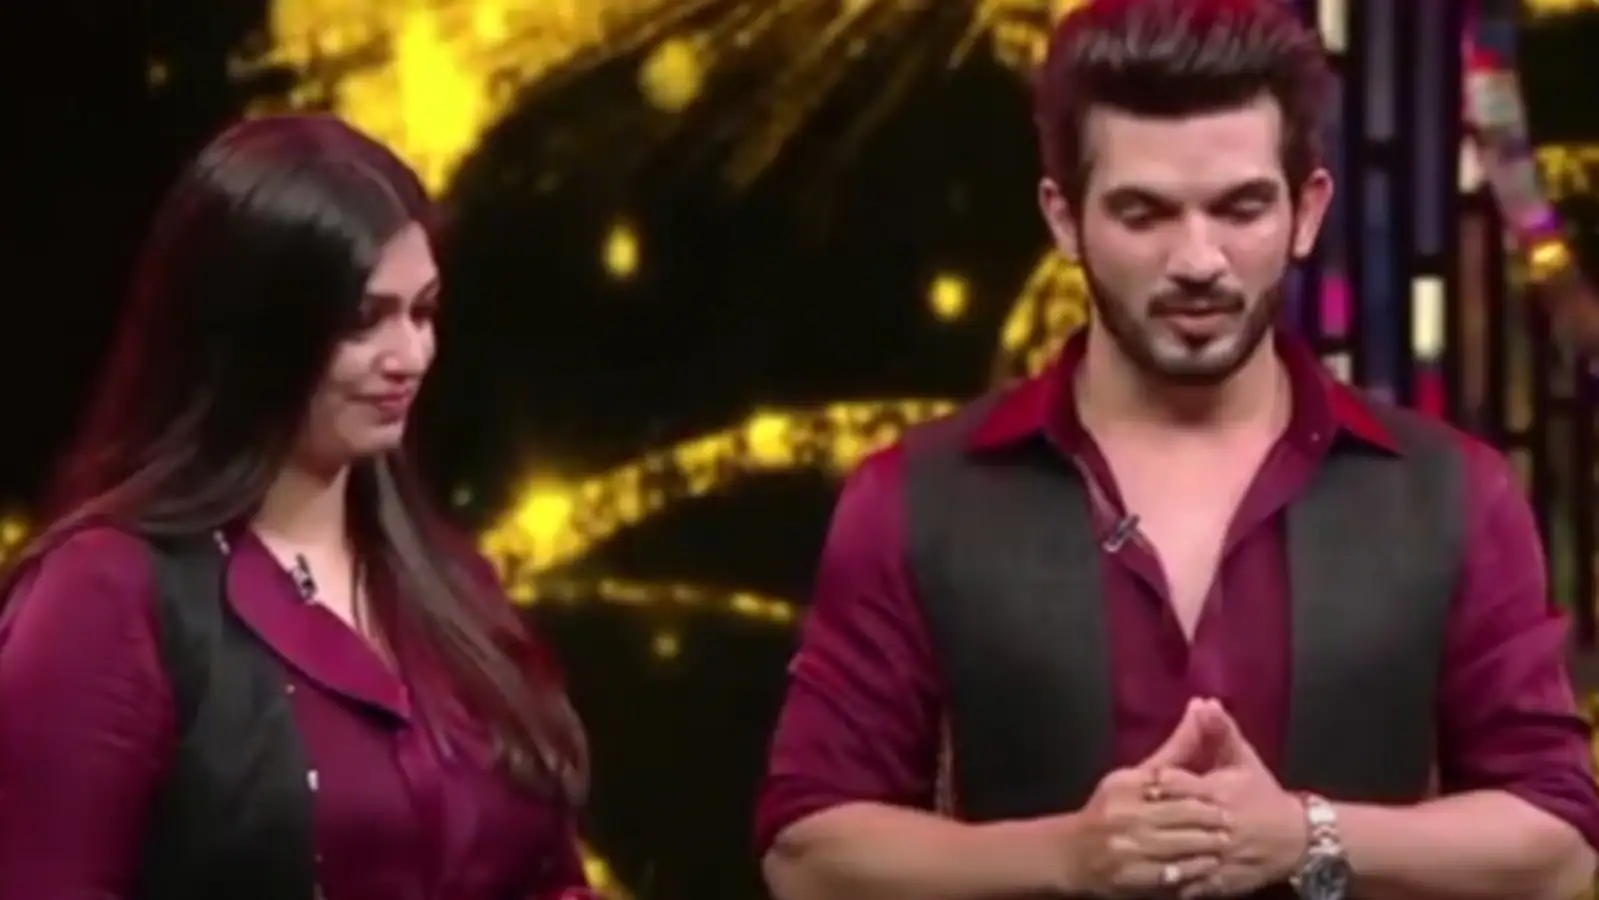 Arjun Bijlani recalls not feeling ready for baby after wife got pregnant: ‘I had only ₹50K. We decided not to do it’